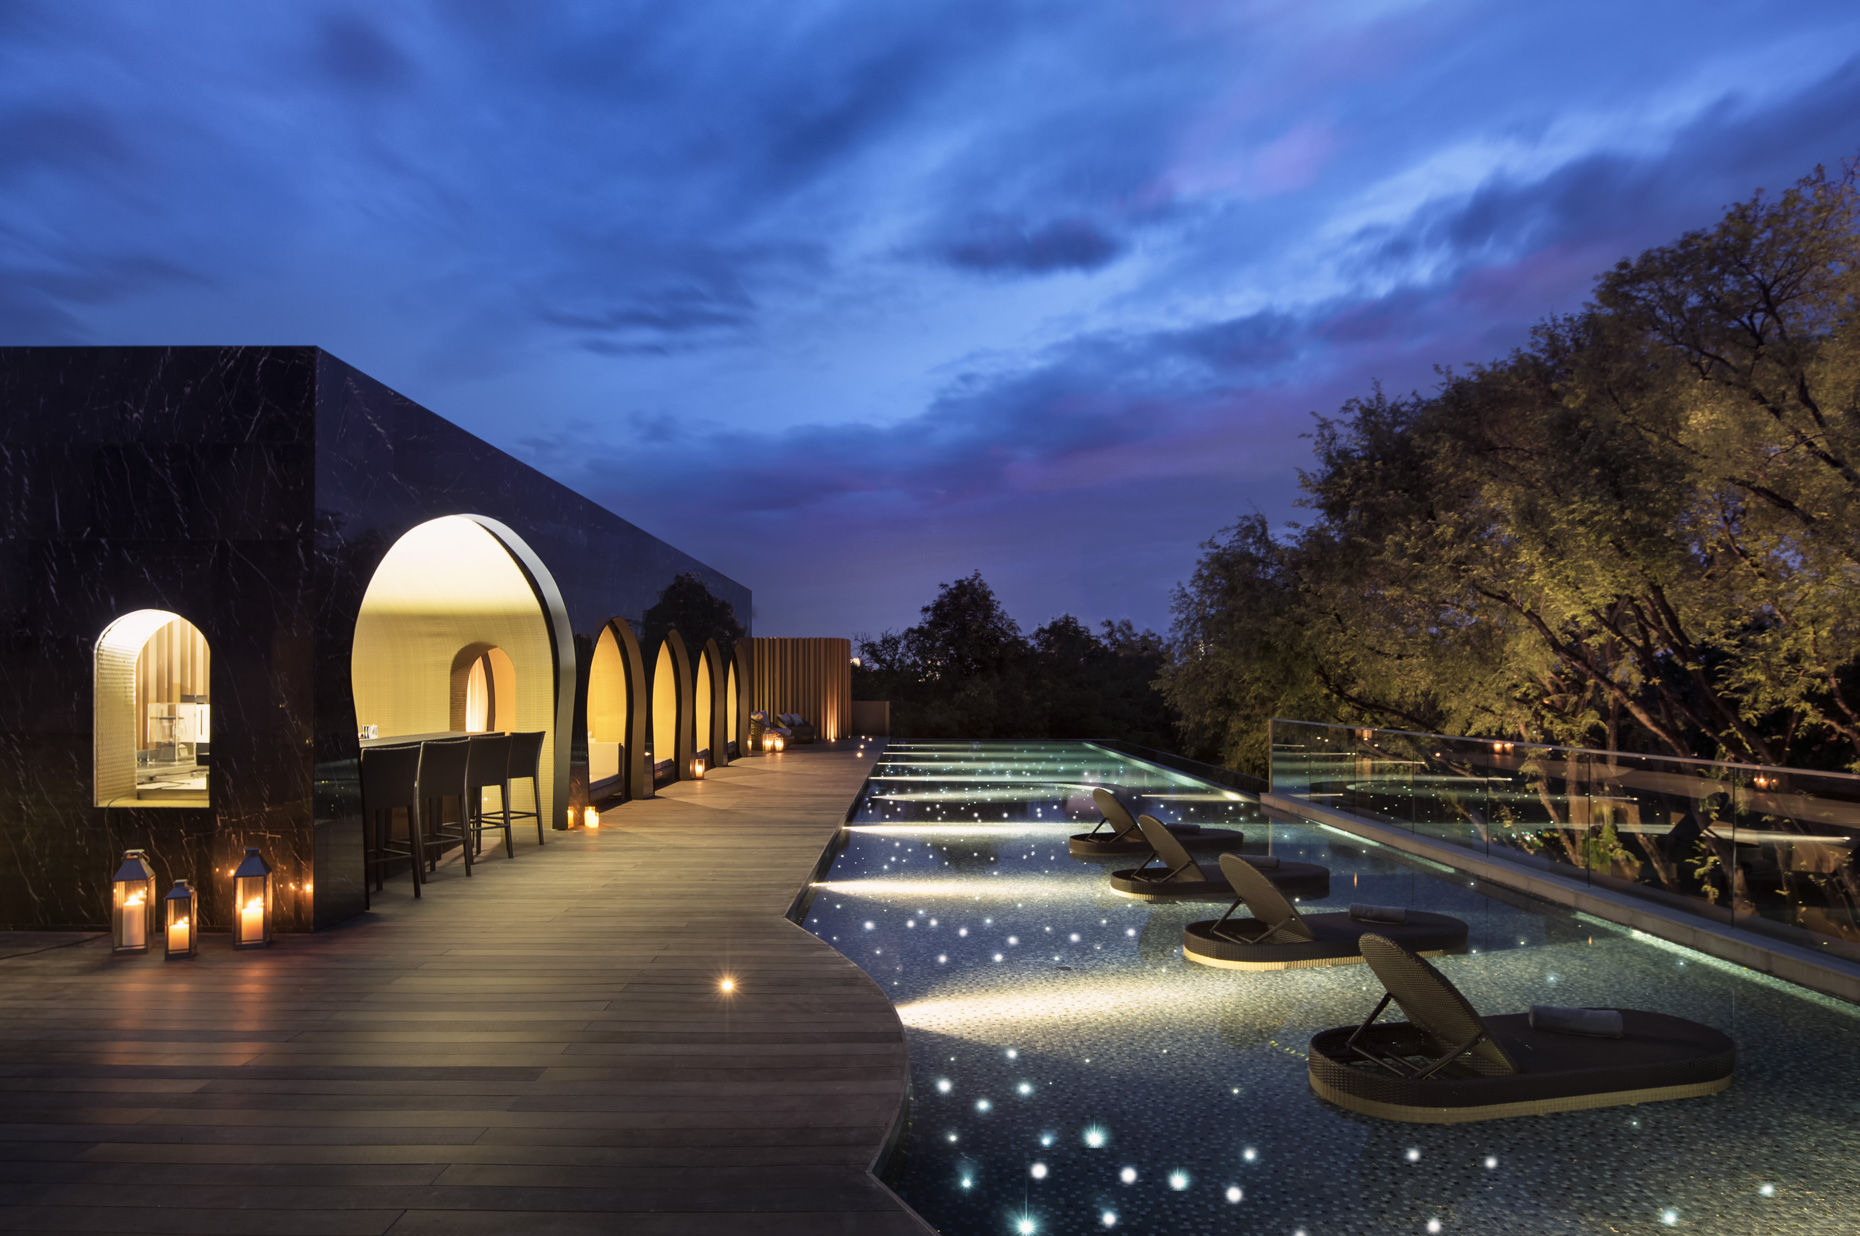 X2 unveils new boutique riverside resort in Chiang Mai